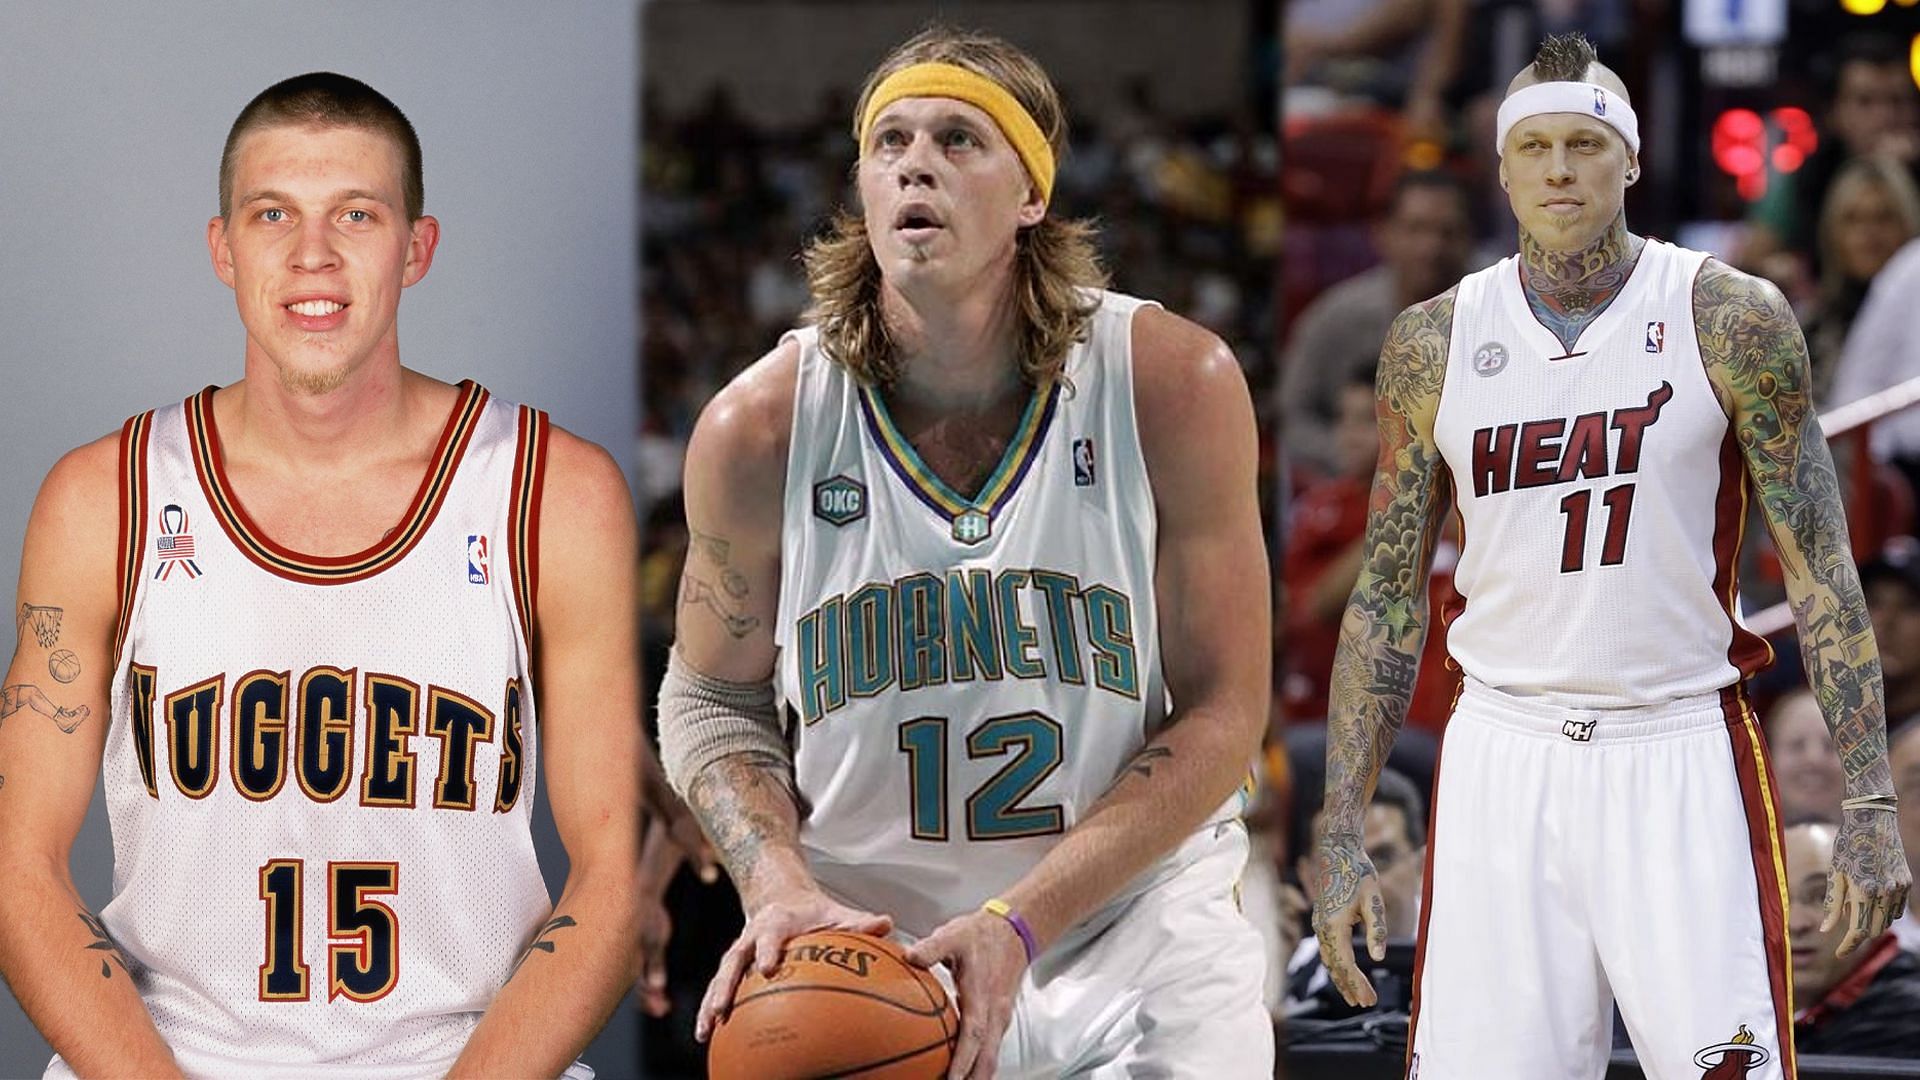 Birdman is among the NBA players who&#039;ve gone through drastic transformations